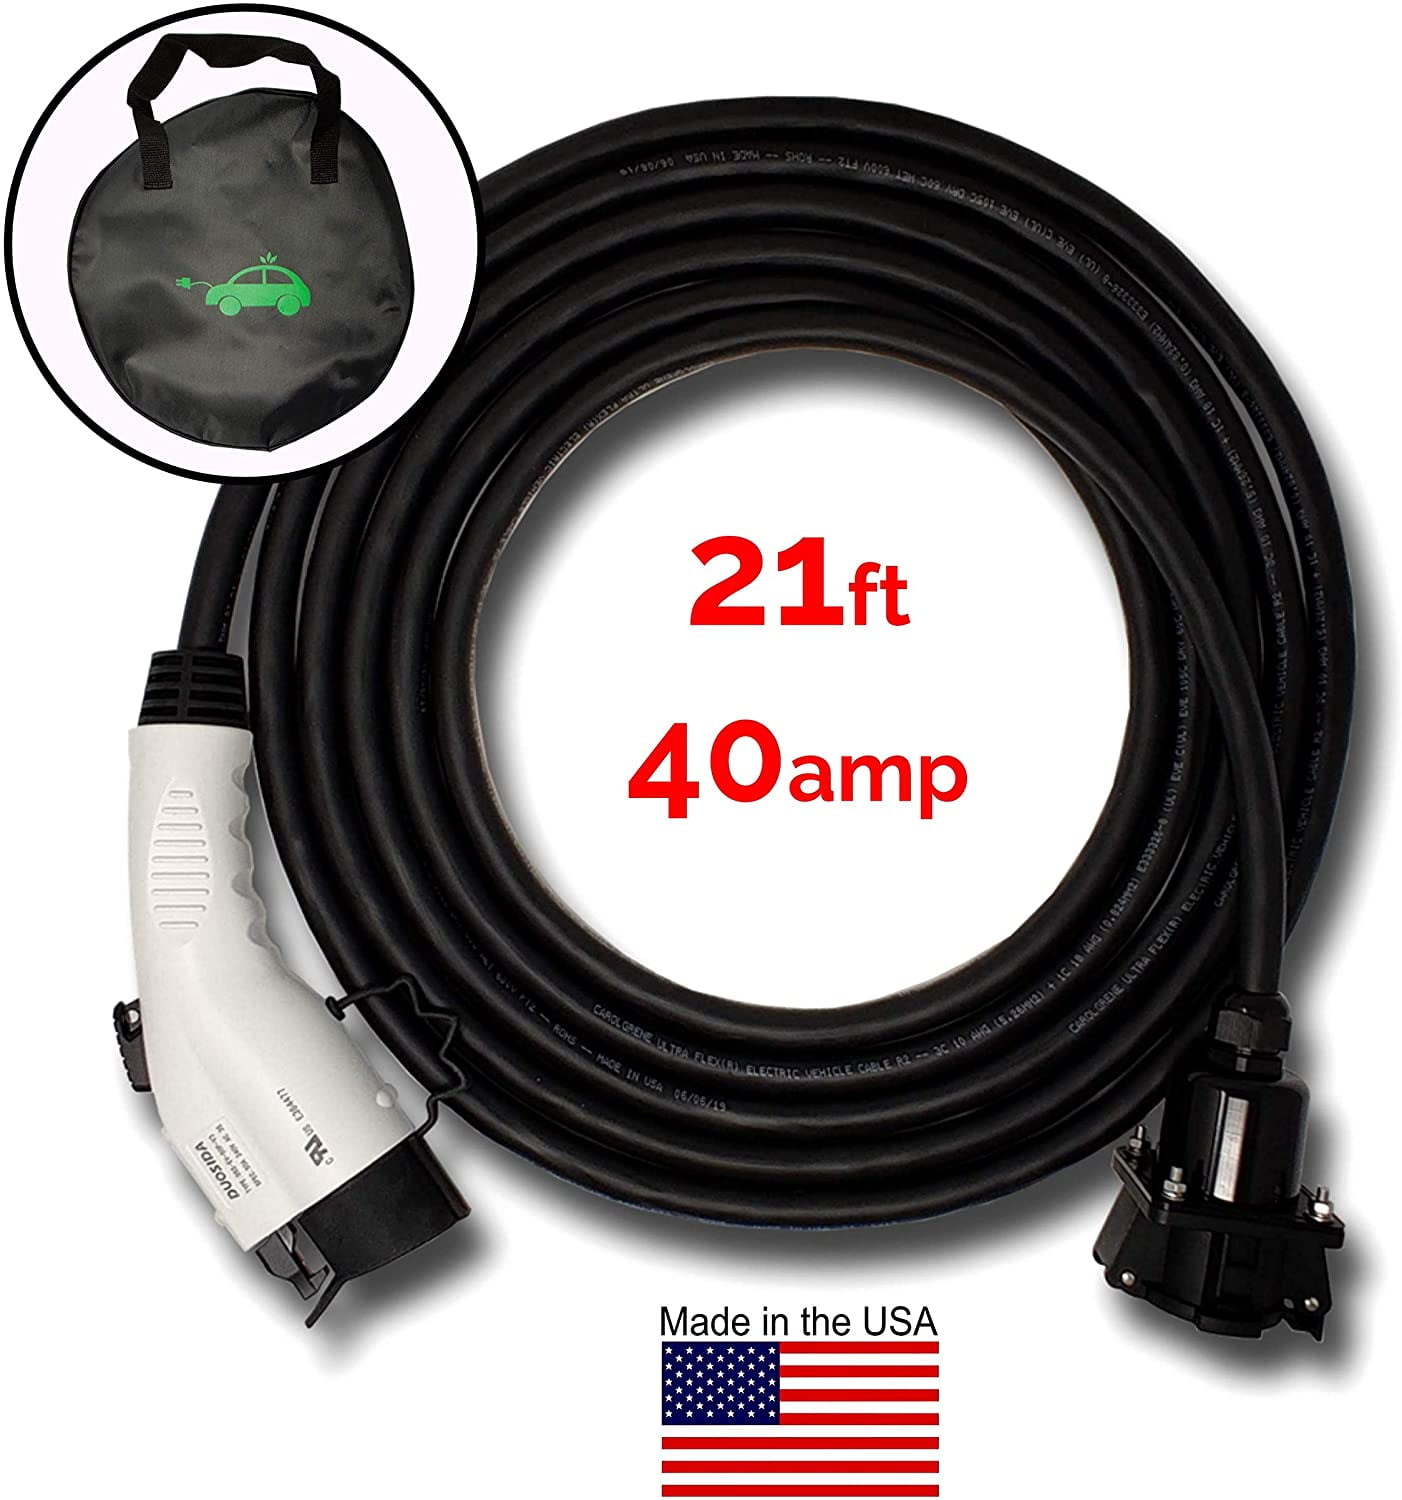 Inteset 21ft 40amp J1772 EV Extension Cord, Made in USA - for